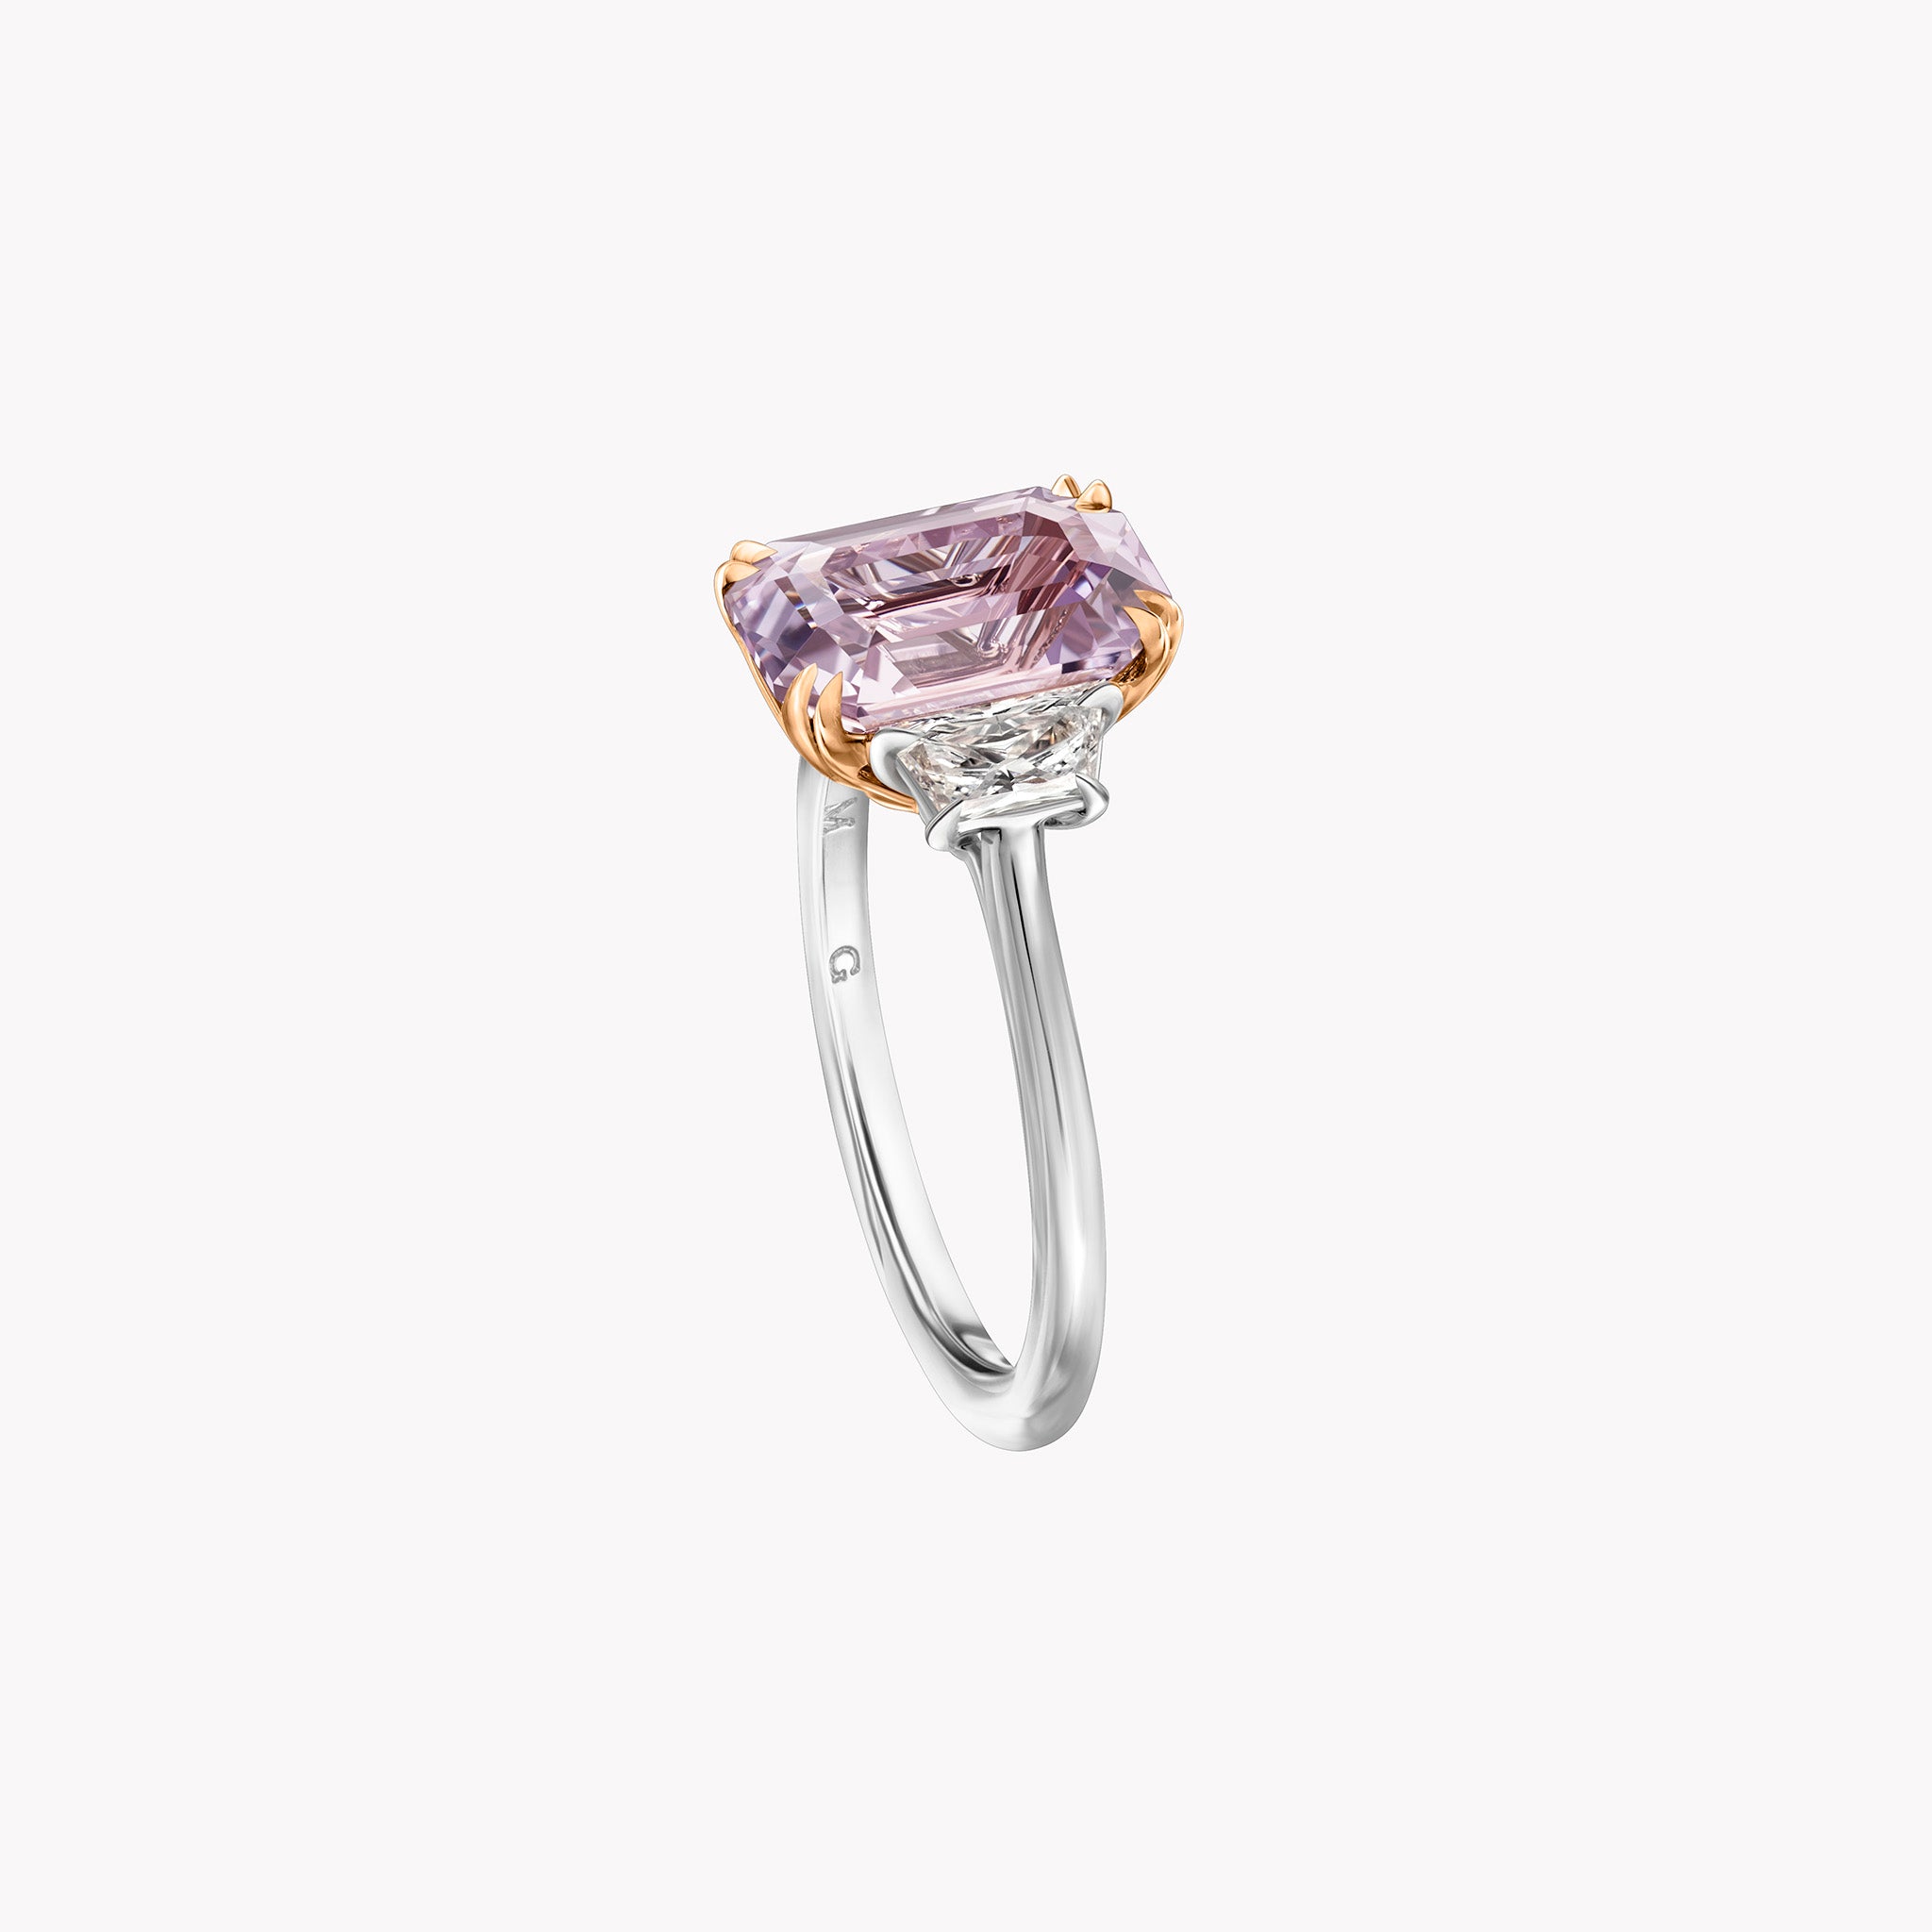 The Aster Lavender Sapphire Ring